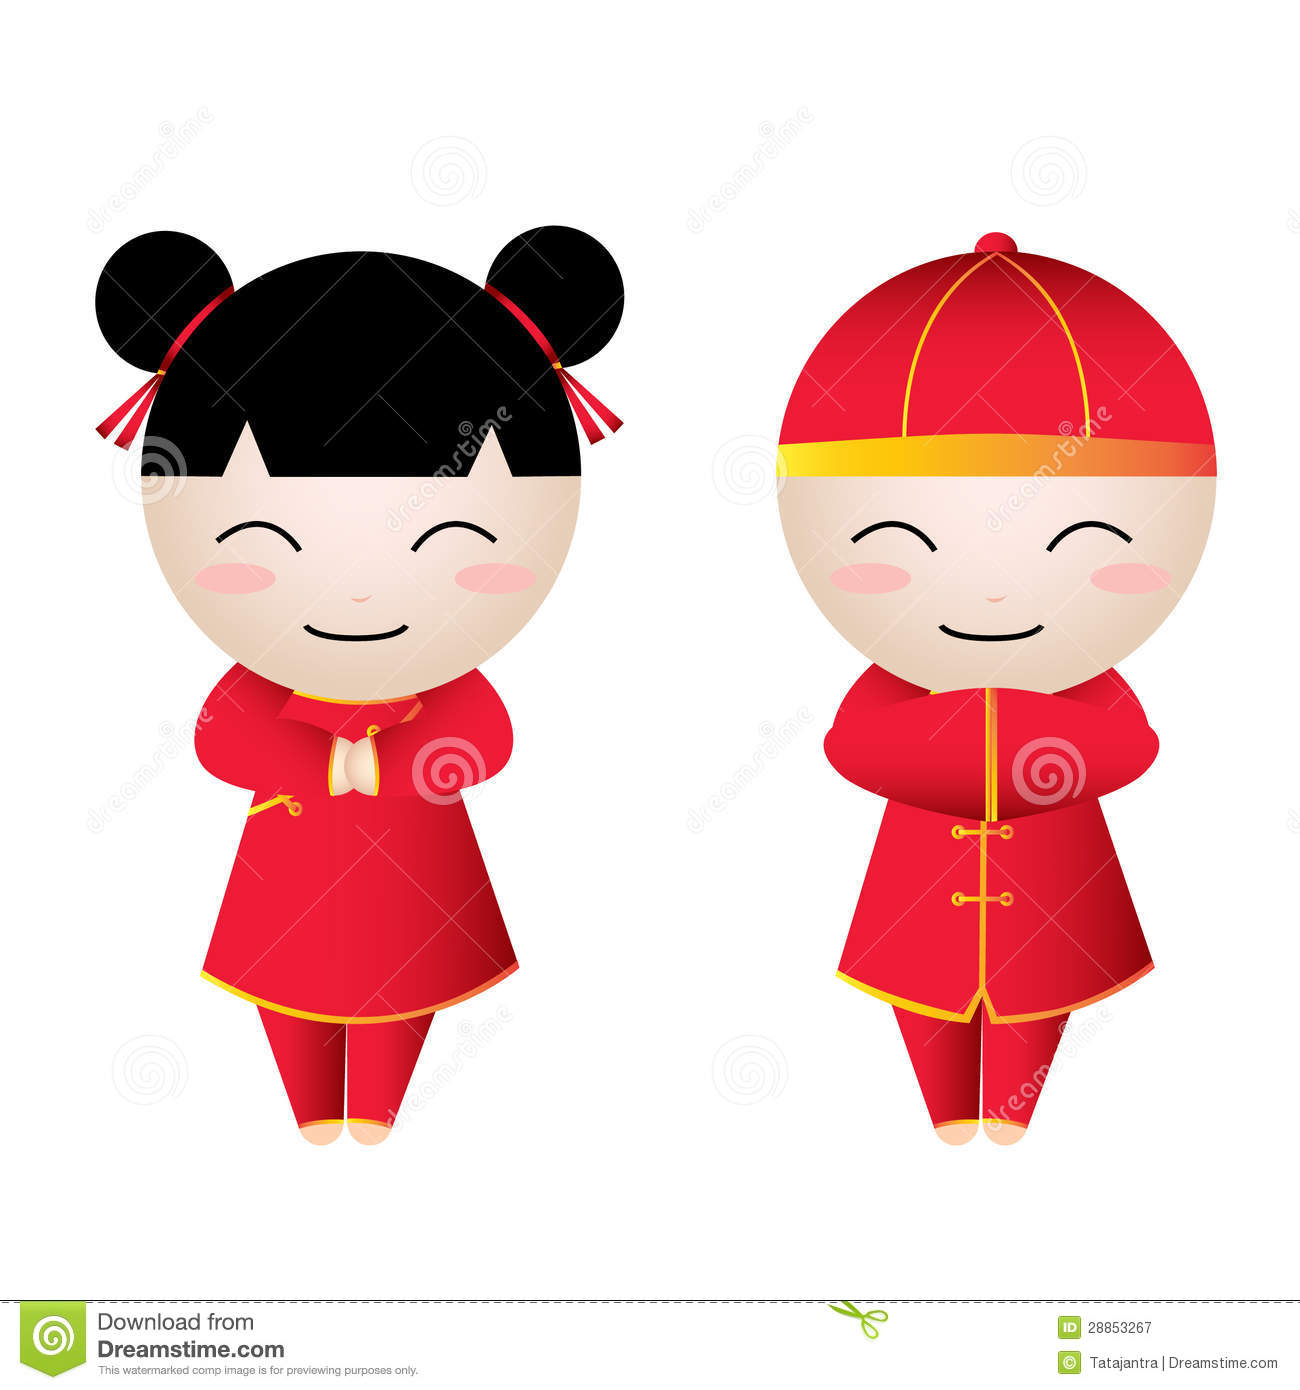 Pencil and in color. China clipart kid chinese